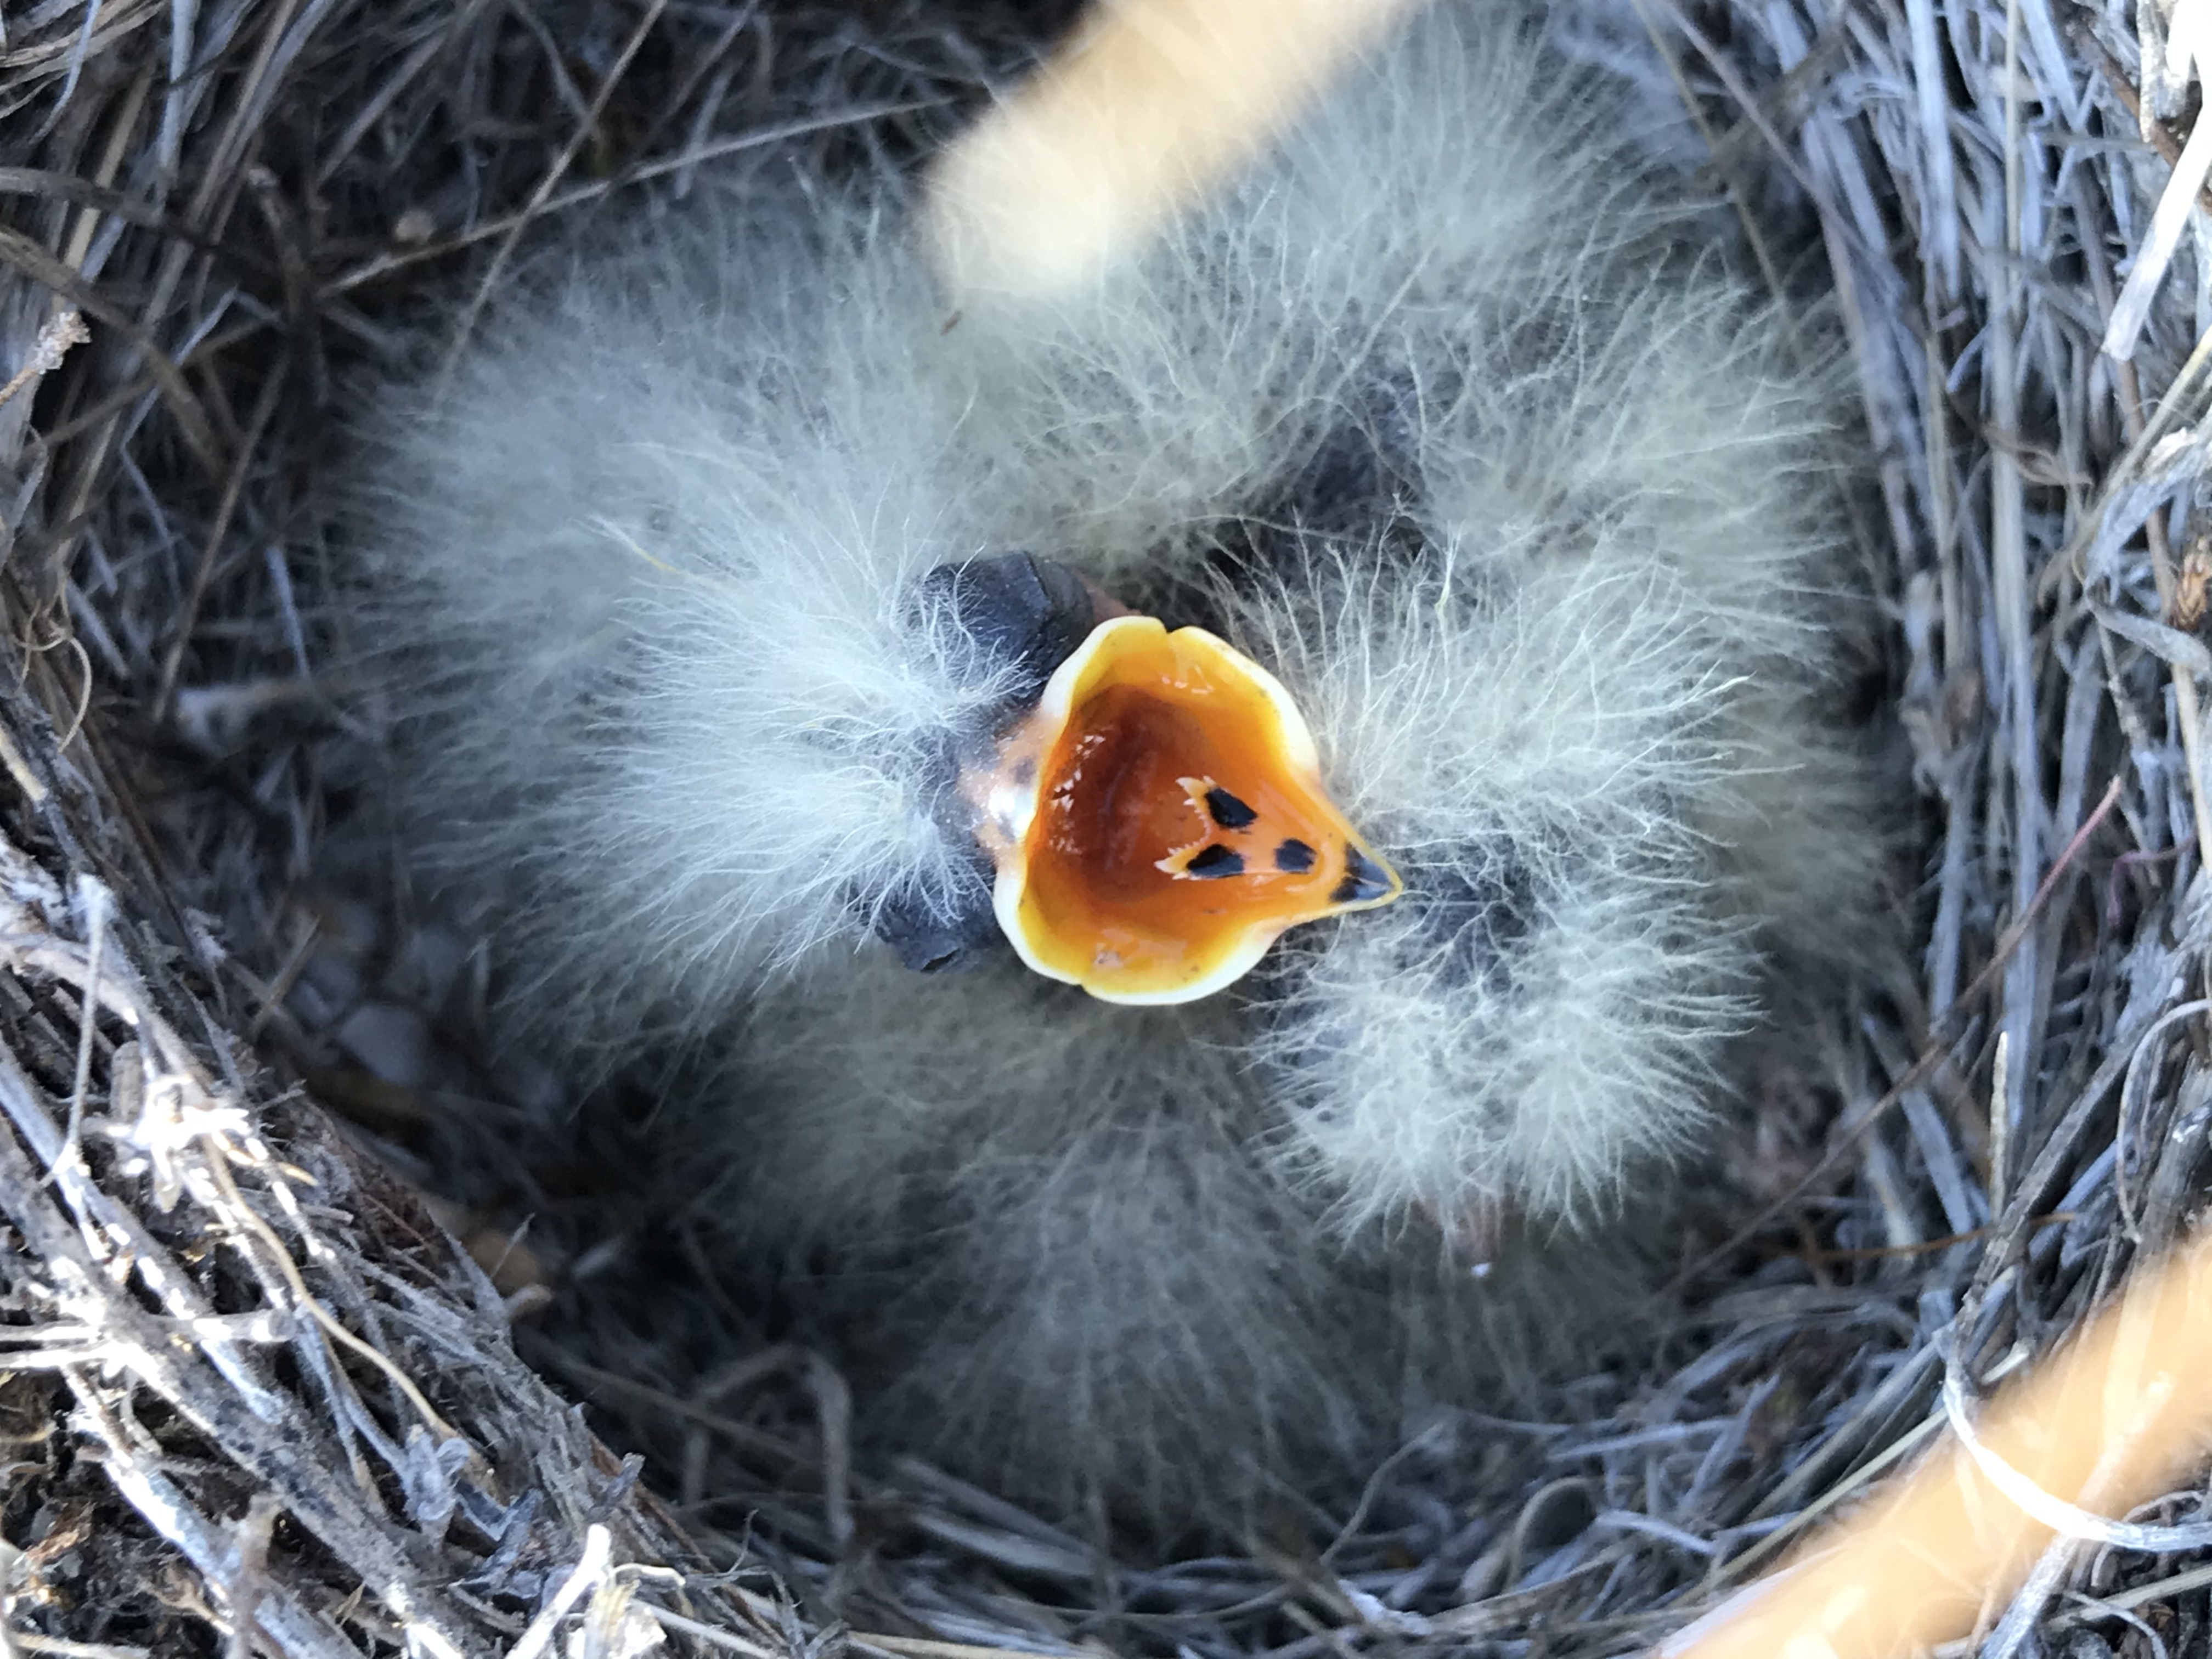 a closeup view of a nest with very downy chicks. They are so fluffy that it's hard to make out individual chicks, but one is facing the camera with a bright yellow mouth wide open begging for food